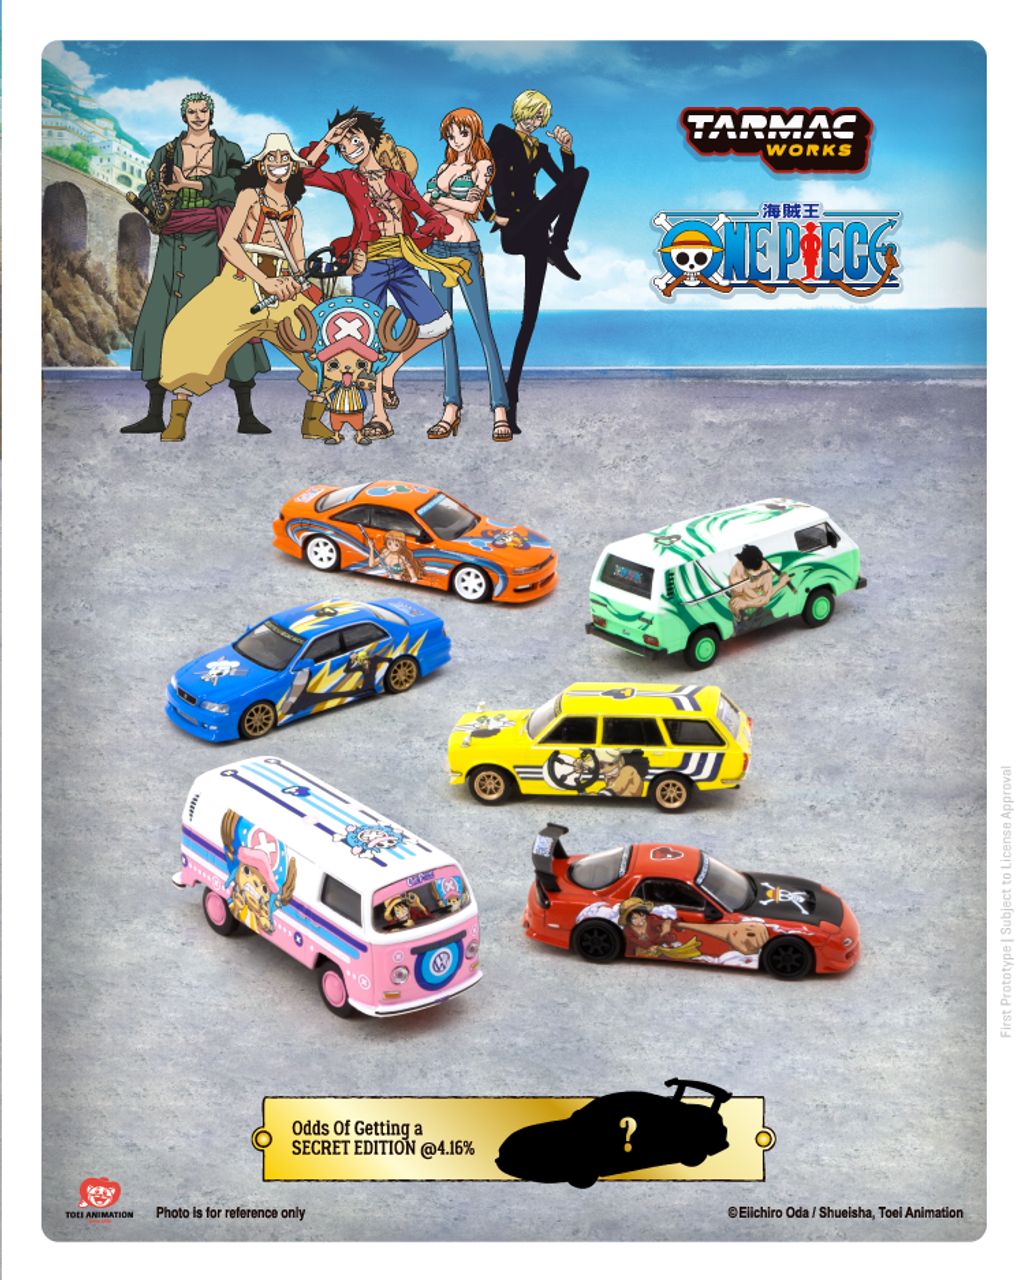 1/64 Tarmac Works "One Piece" Theme 6-Car Set Collection plus 1 Chase Car